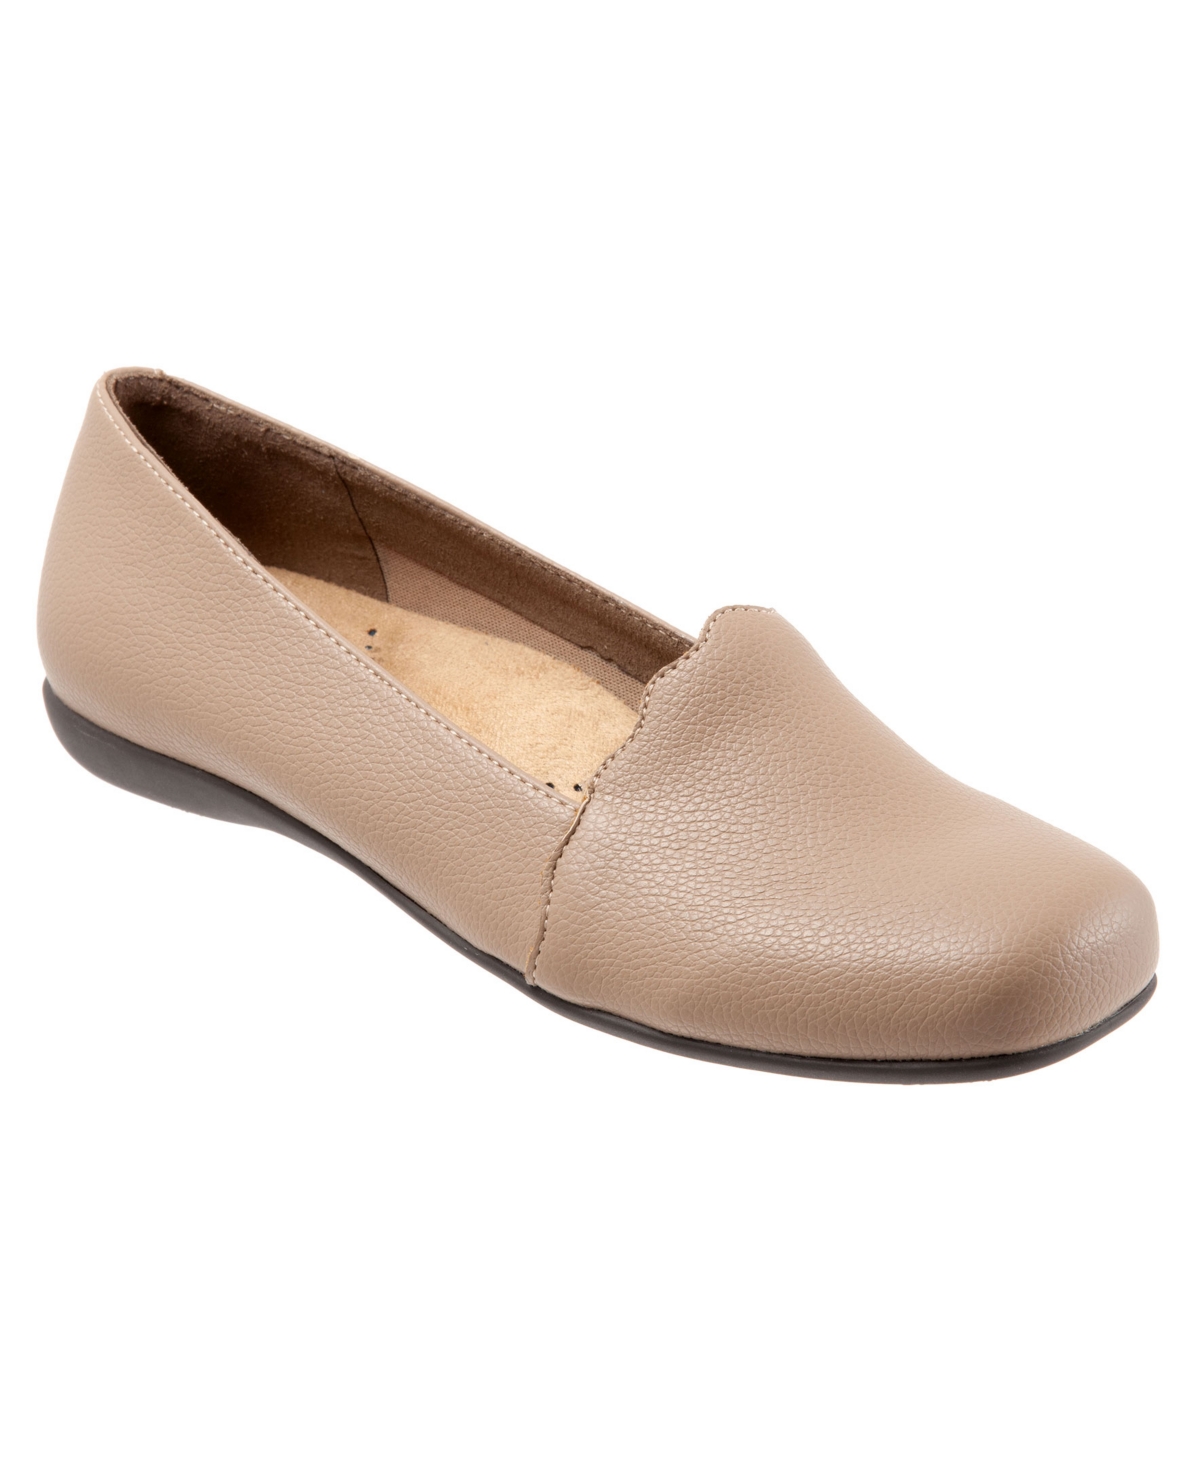 Women's Sage Loafers - Taupe patent